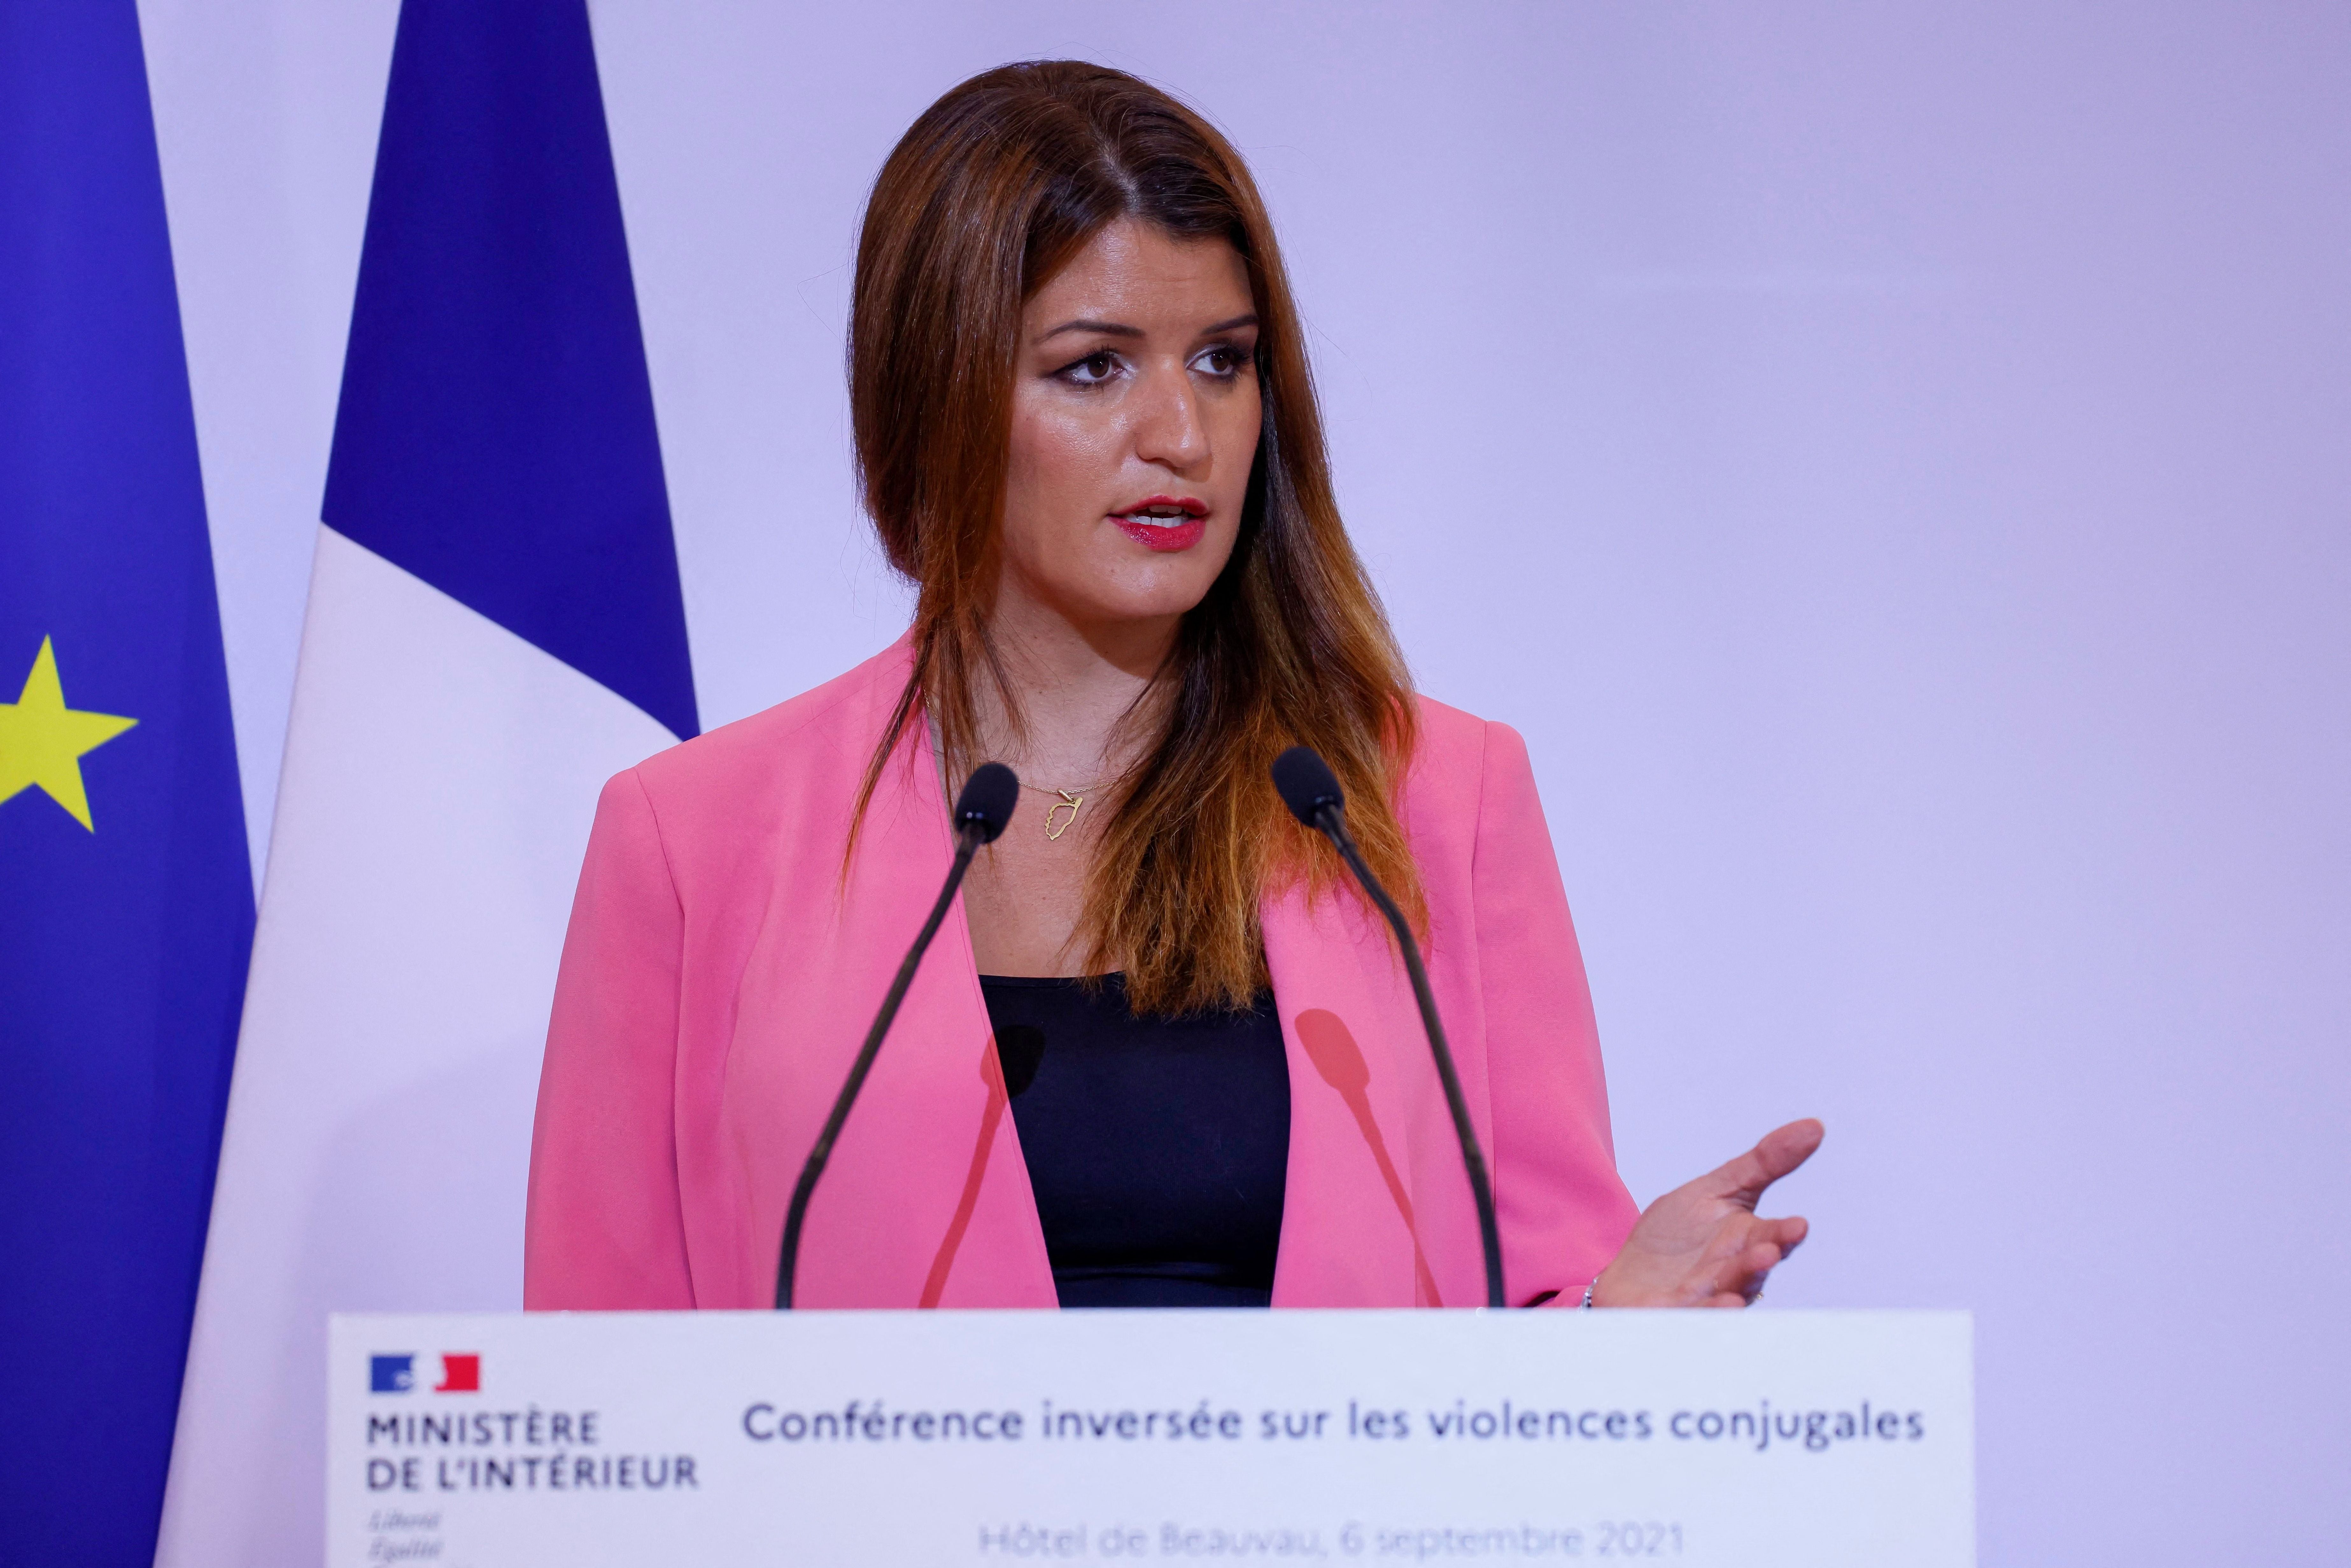 It isn’t the first time Marlene Schiappa has divided opinion